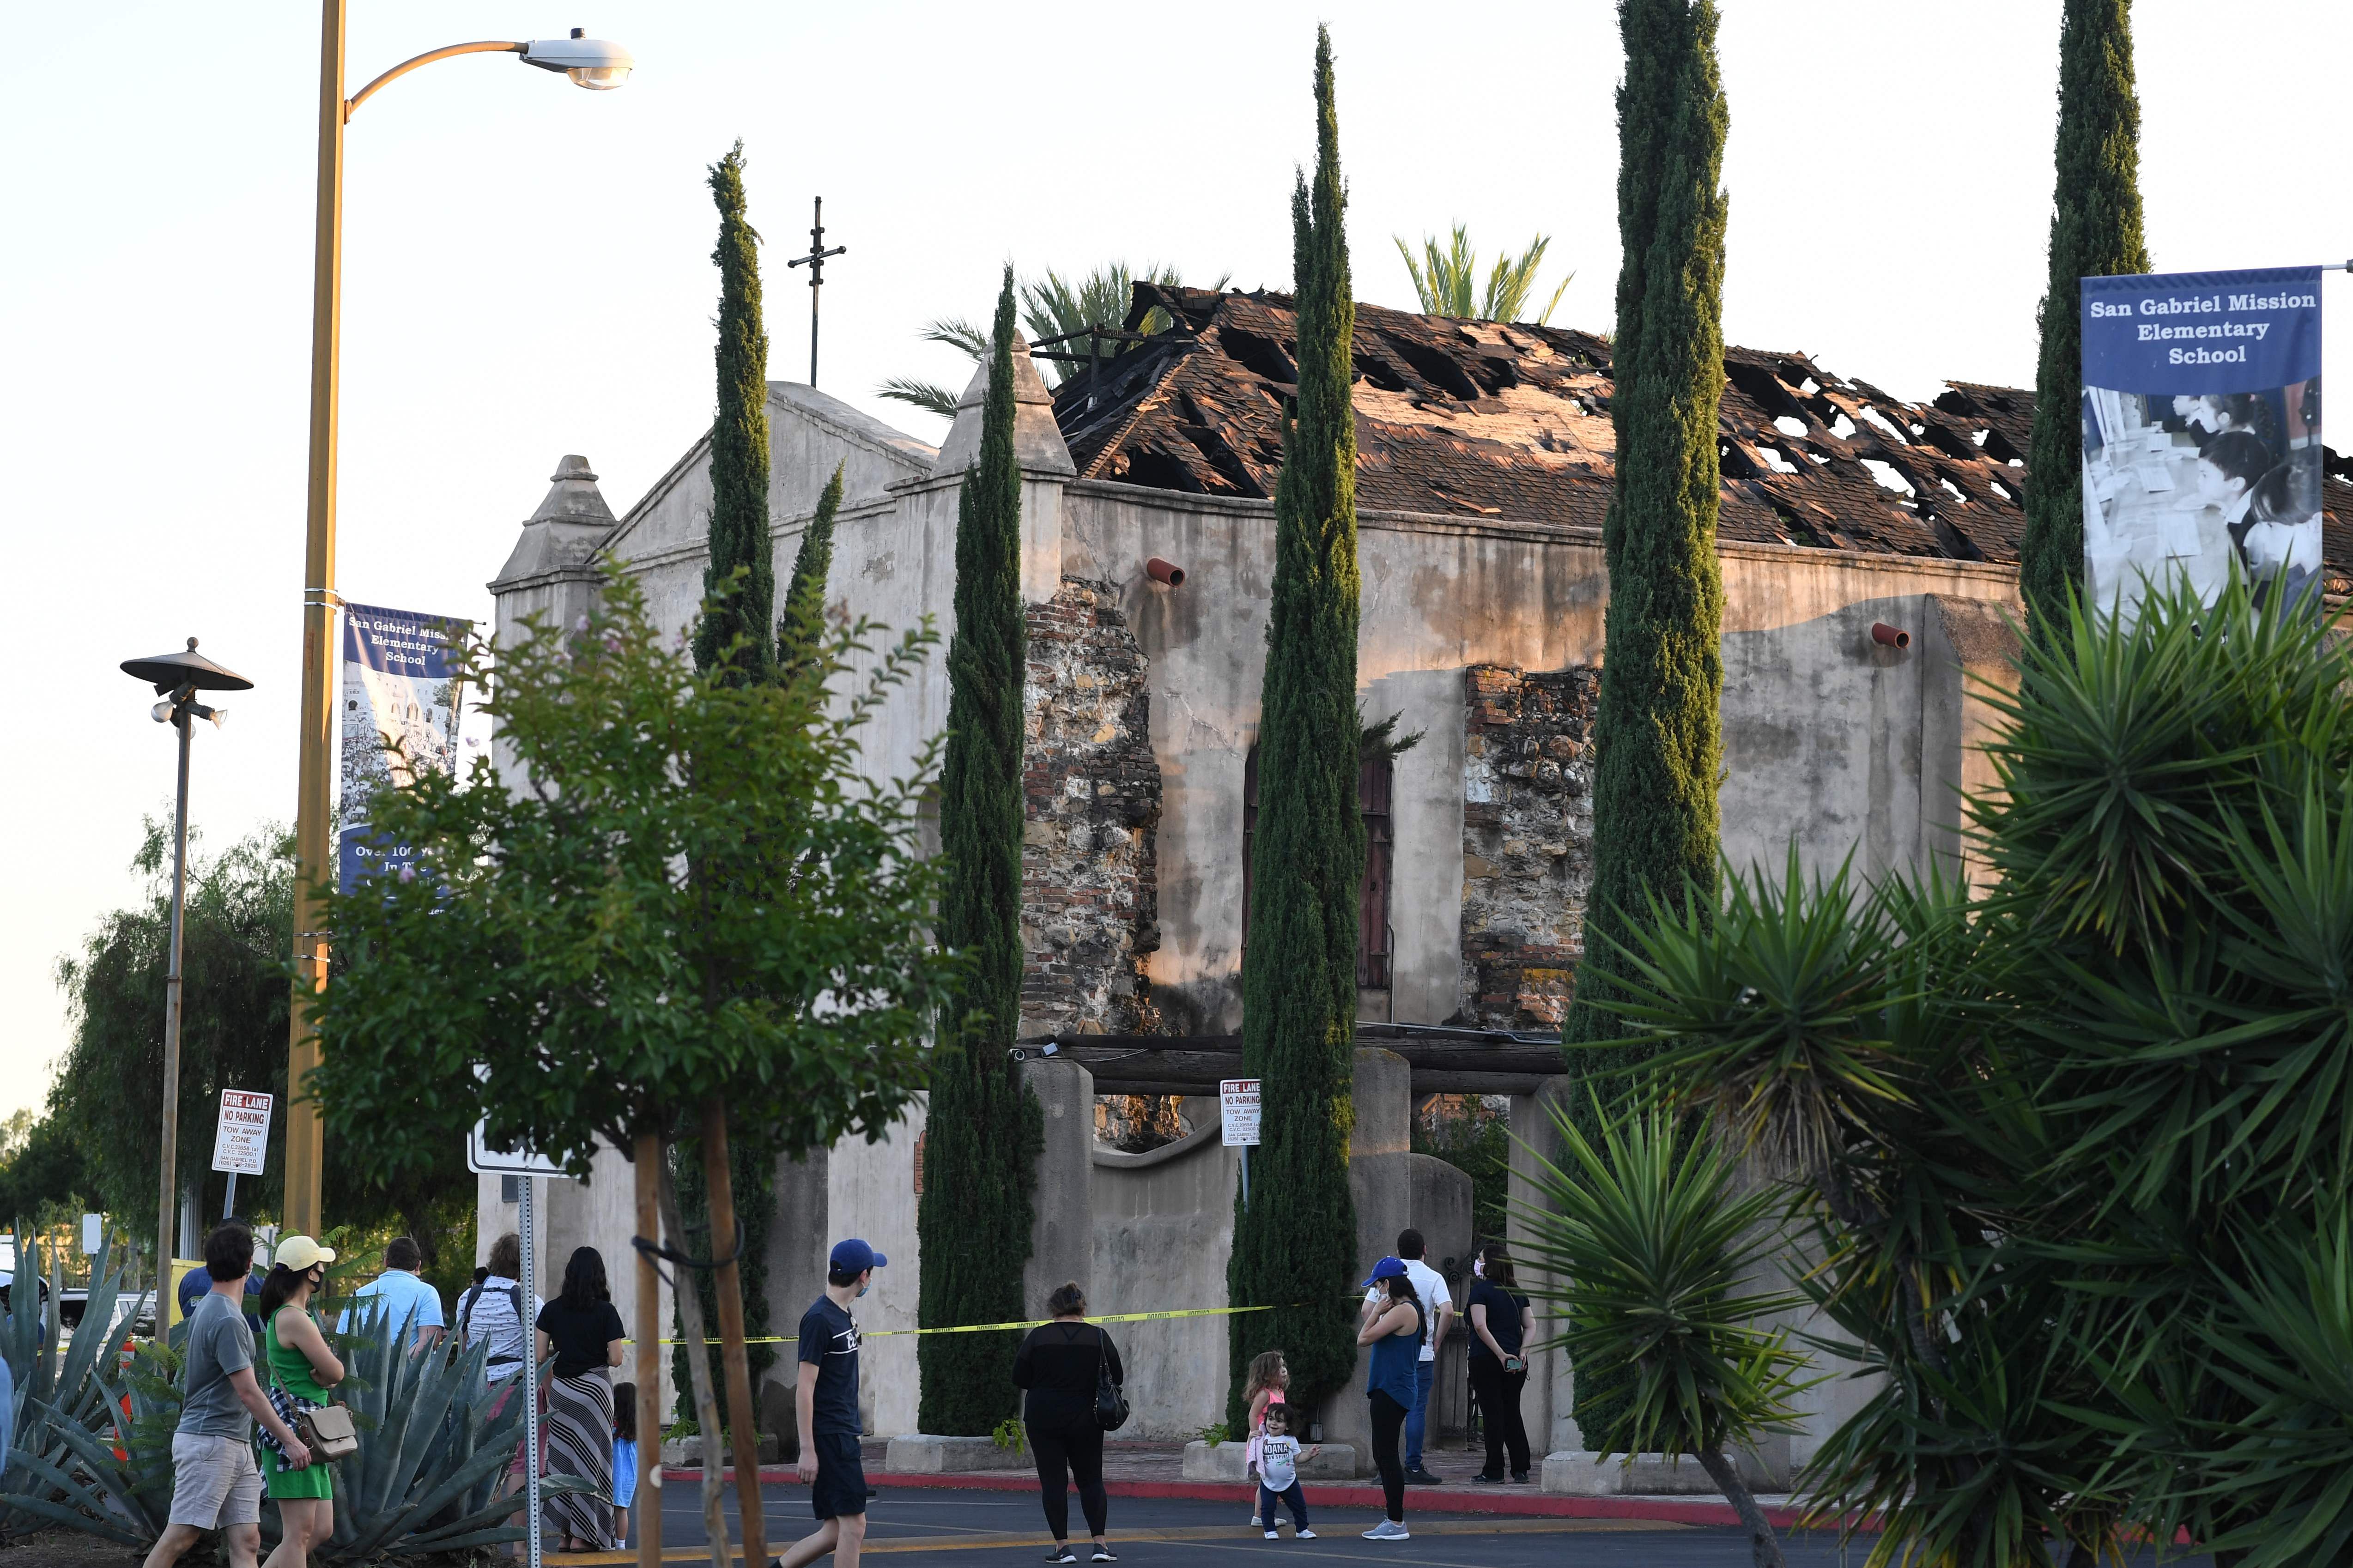 The damaged roof of the San Gabriel Mission is seen after a fire broke out early on July 11, 2020, in San Gabriel, California. Credits: AFP Photo